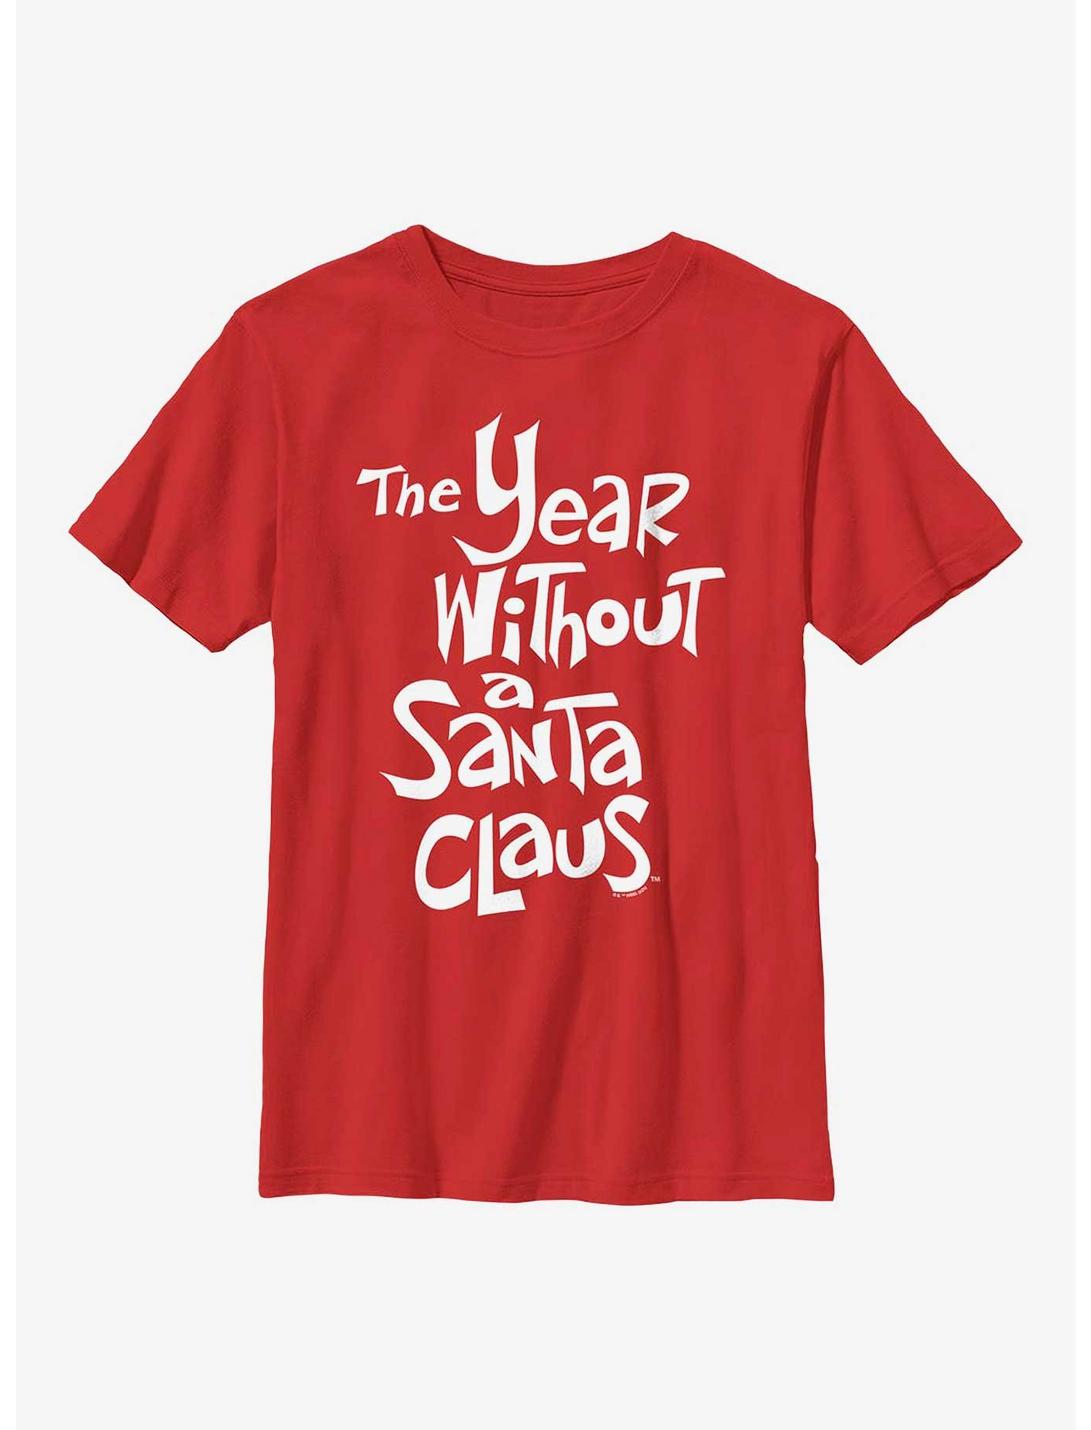 The Year Without Santa Claus White Logo Youth T-Shirt, RED, hi-res